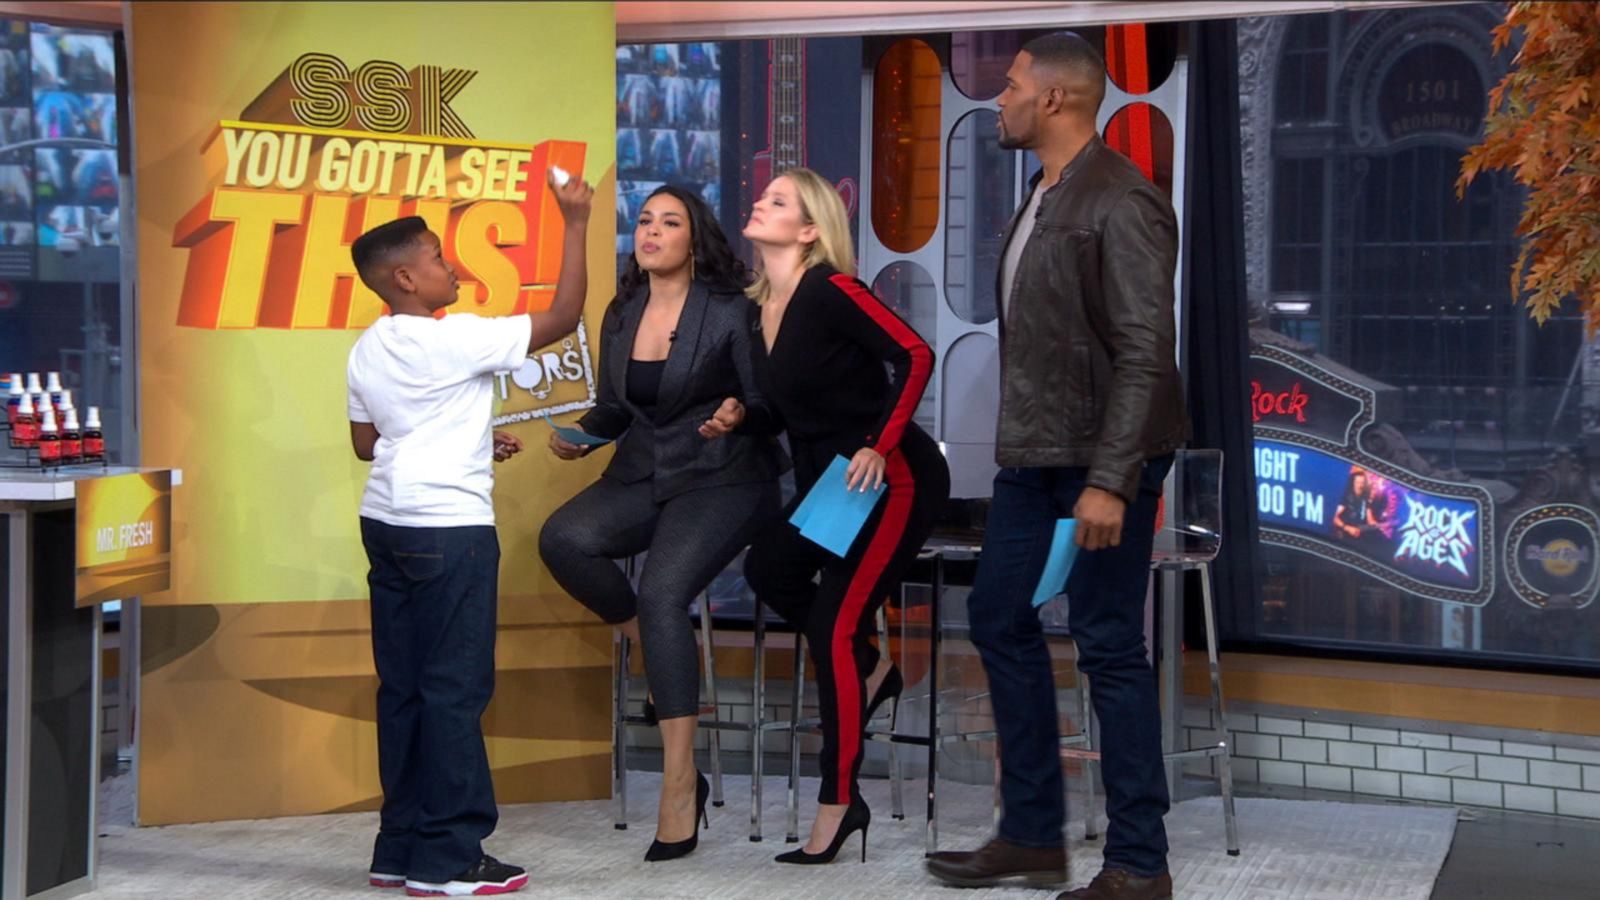 Viral 7-year-old singer with old school charm - Good Morning America